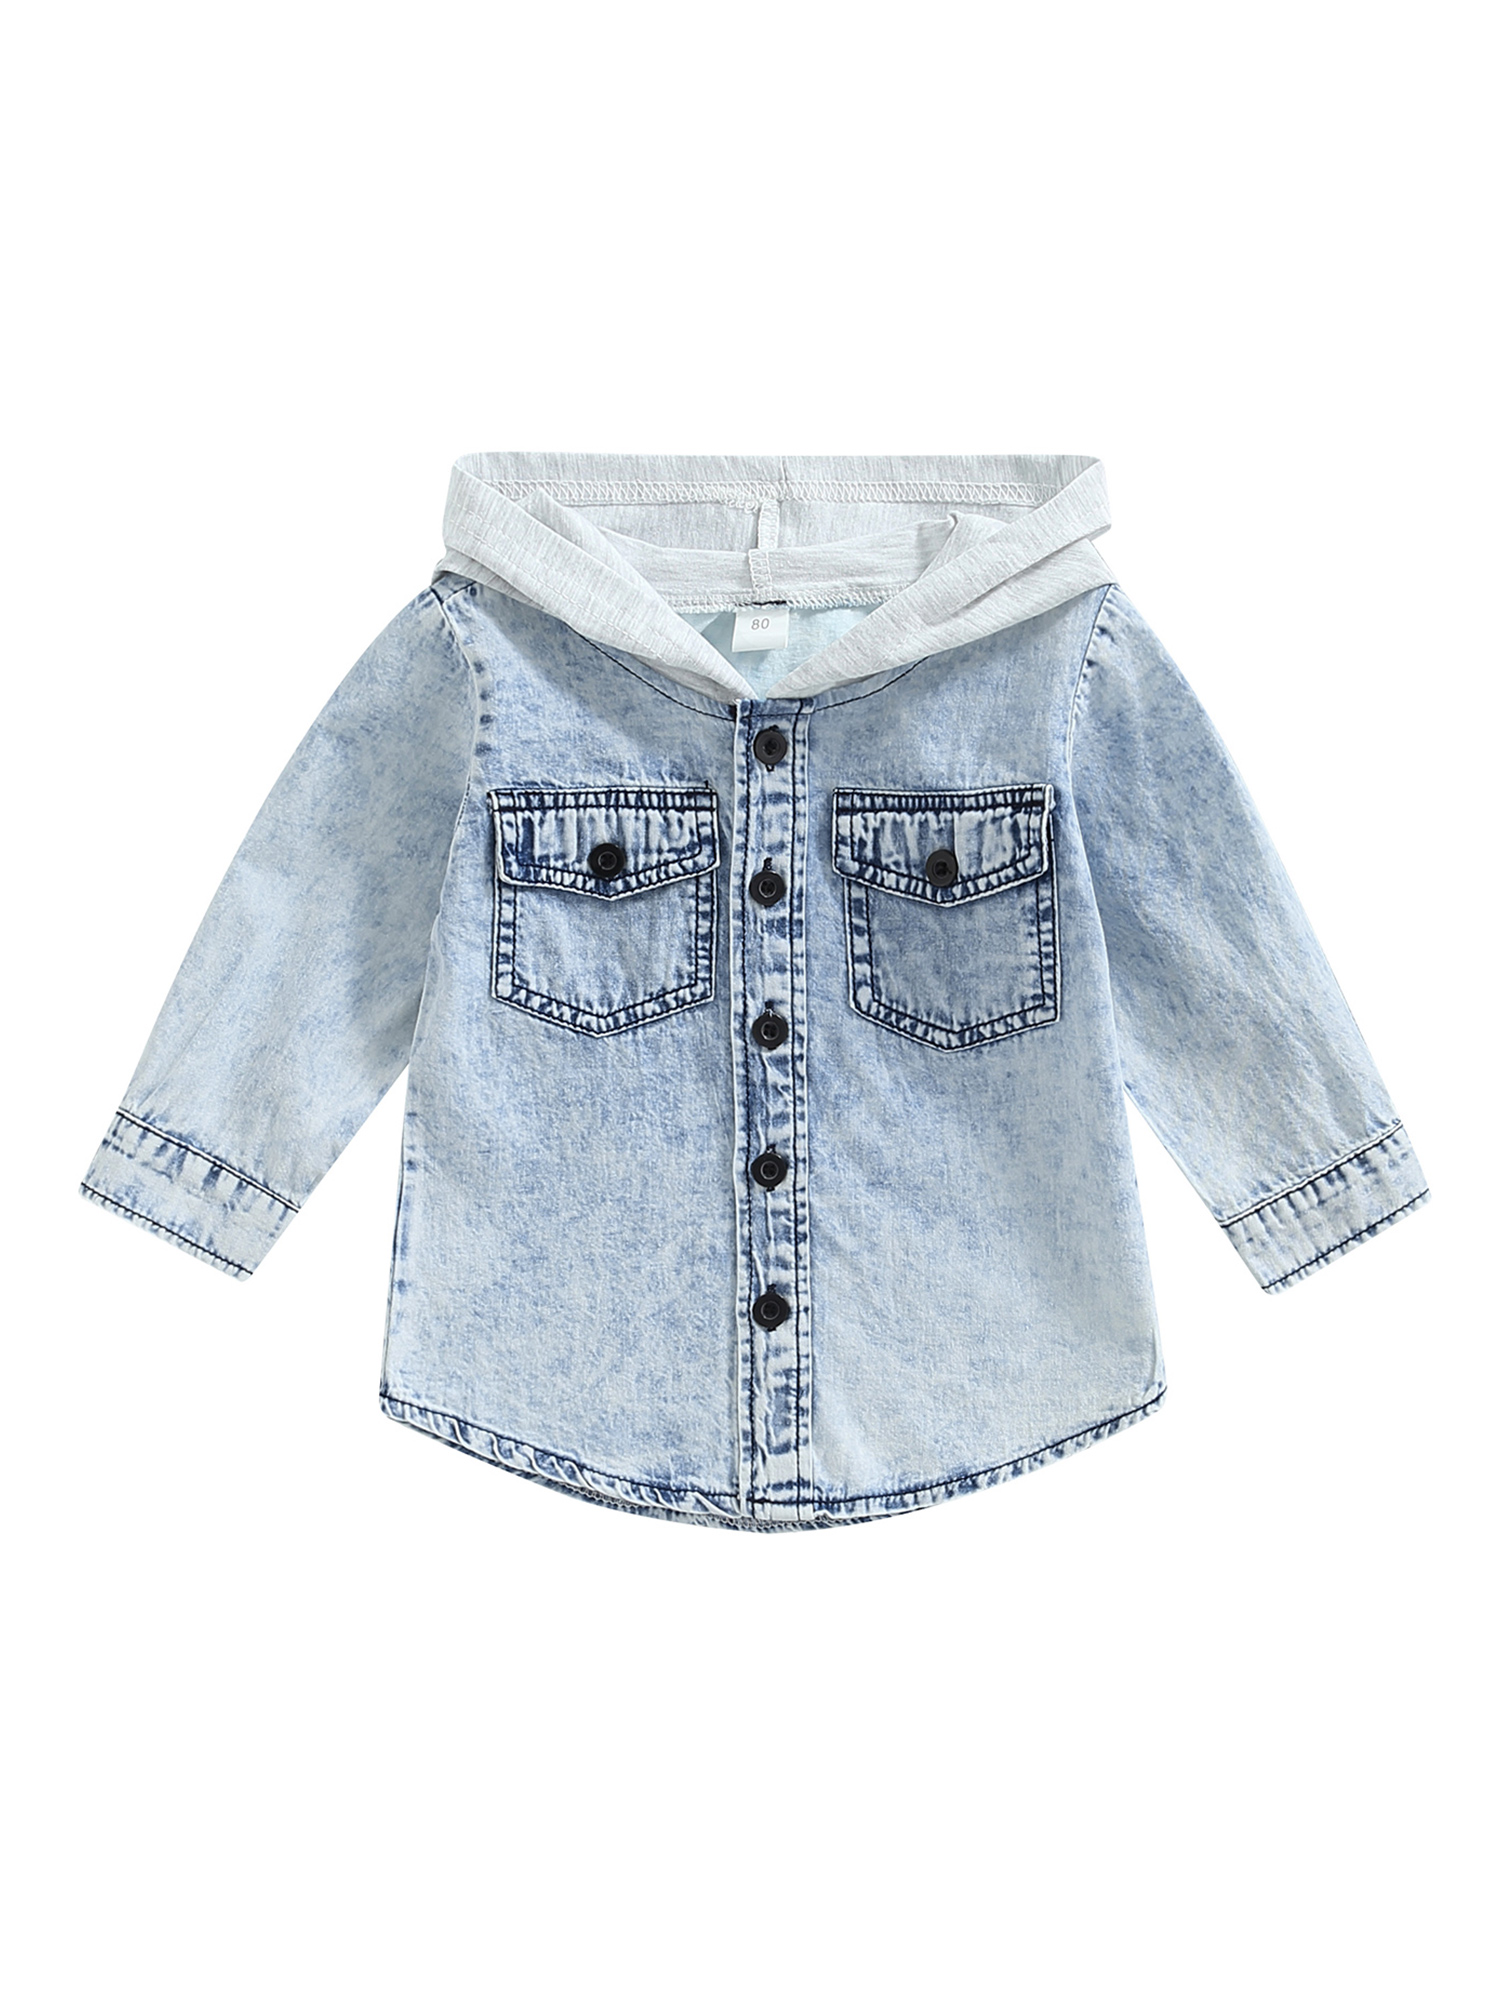 Sunisery Baby Boys Denim Hoodie Jacket Kids Toddler Button Down Jeans Jacket Top Spring Autumn Coat Outerwear - image 1 of 6